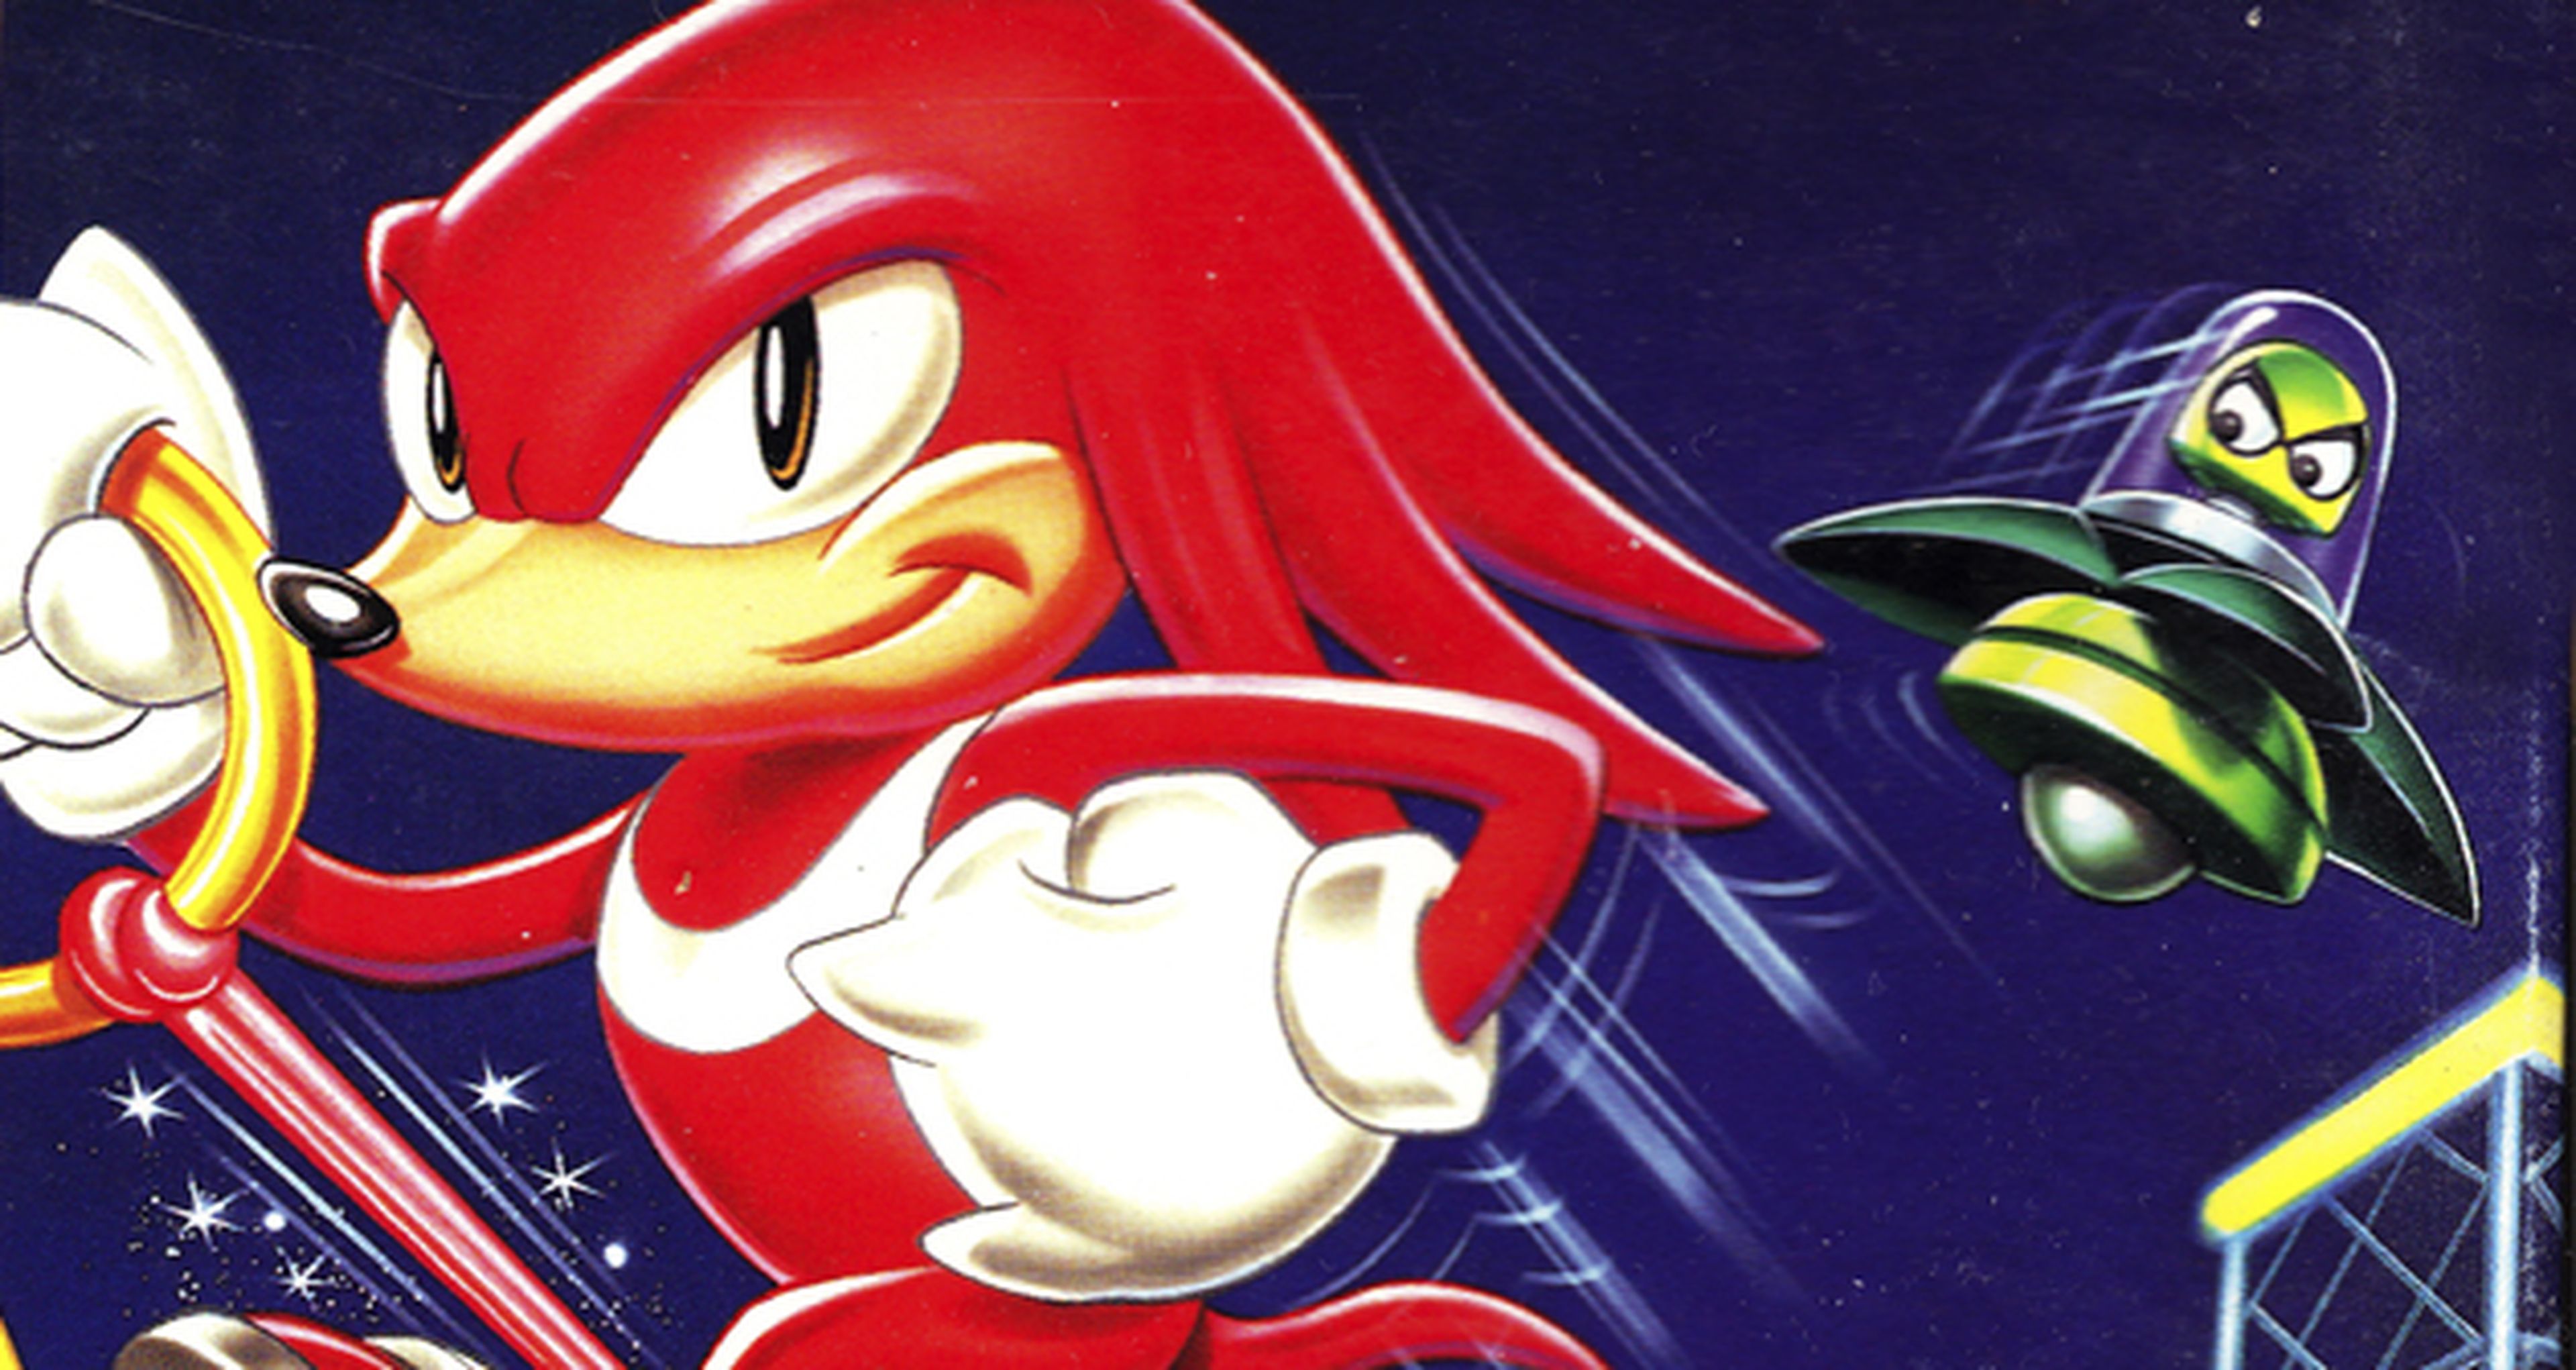 Hobby Consolas, hace 20 años: Knuckles&#039; Chaotix